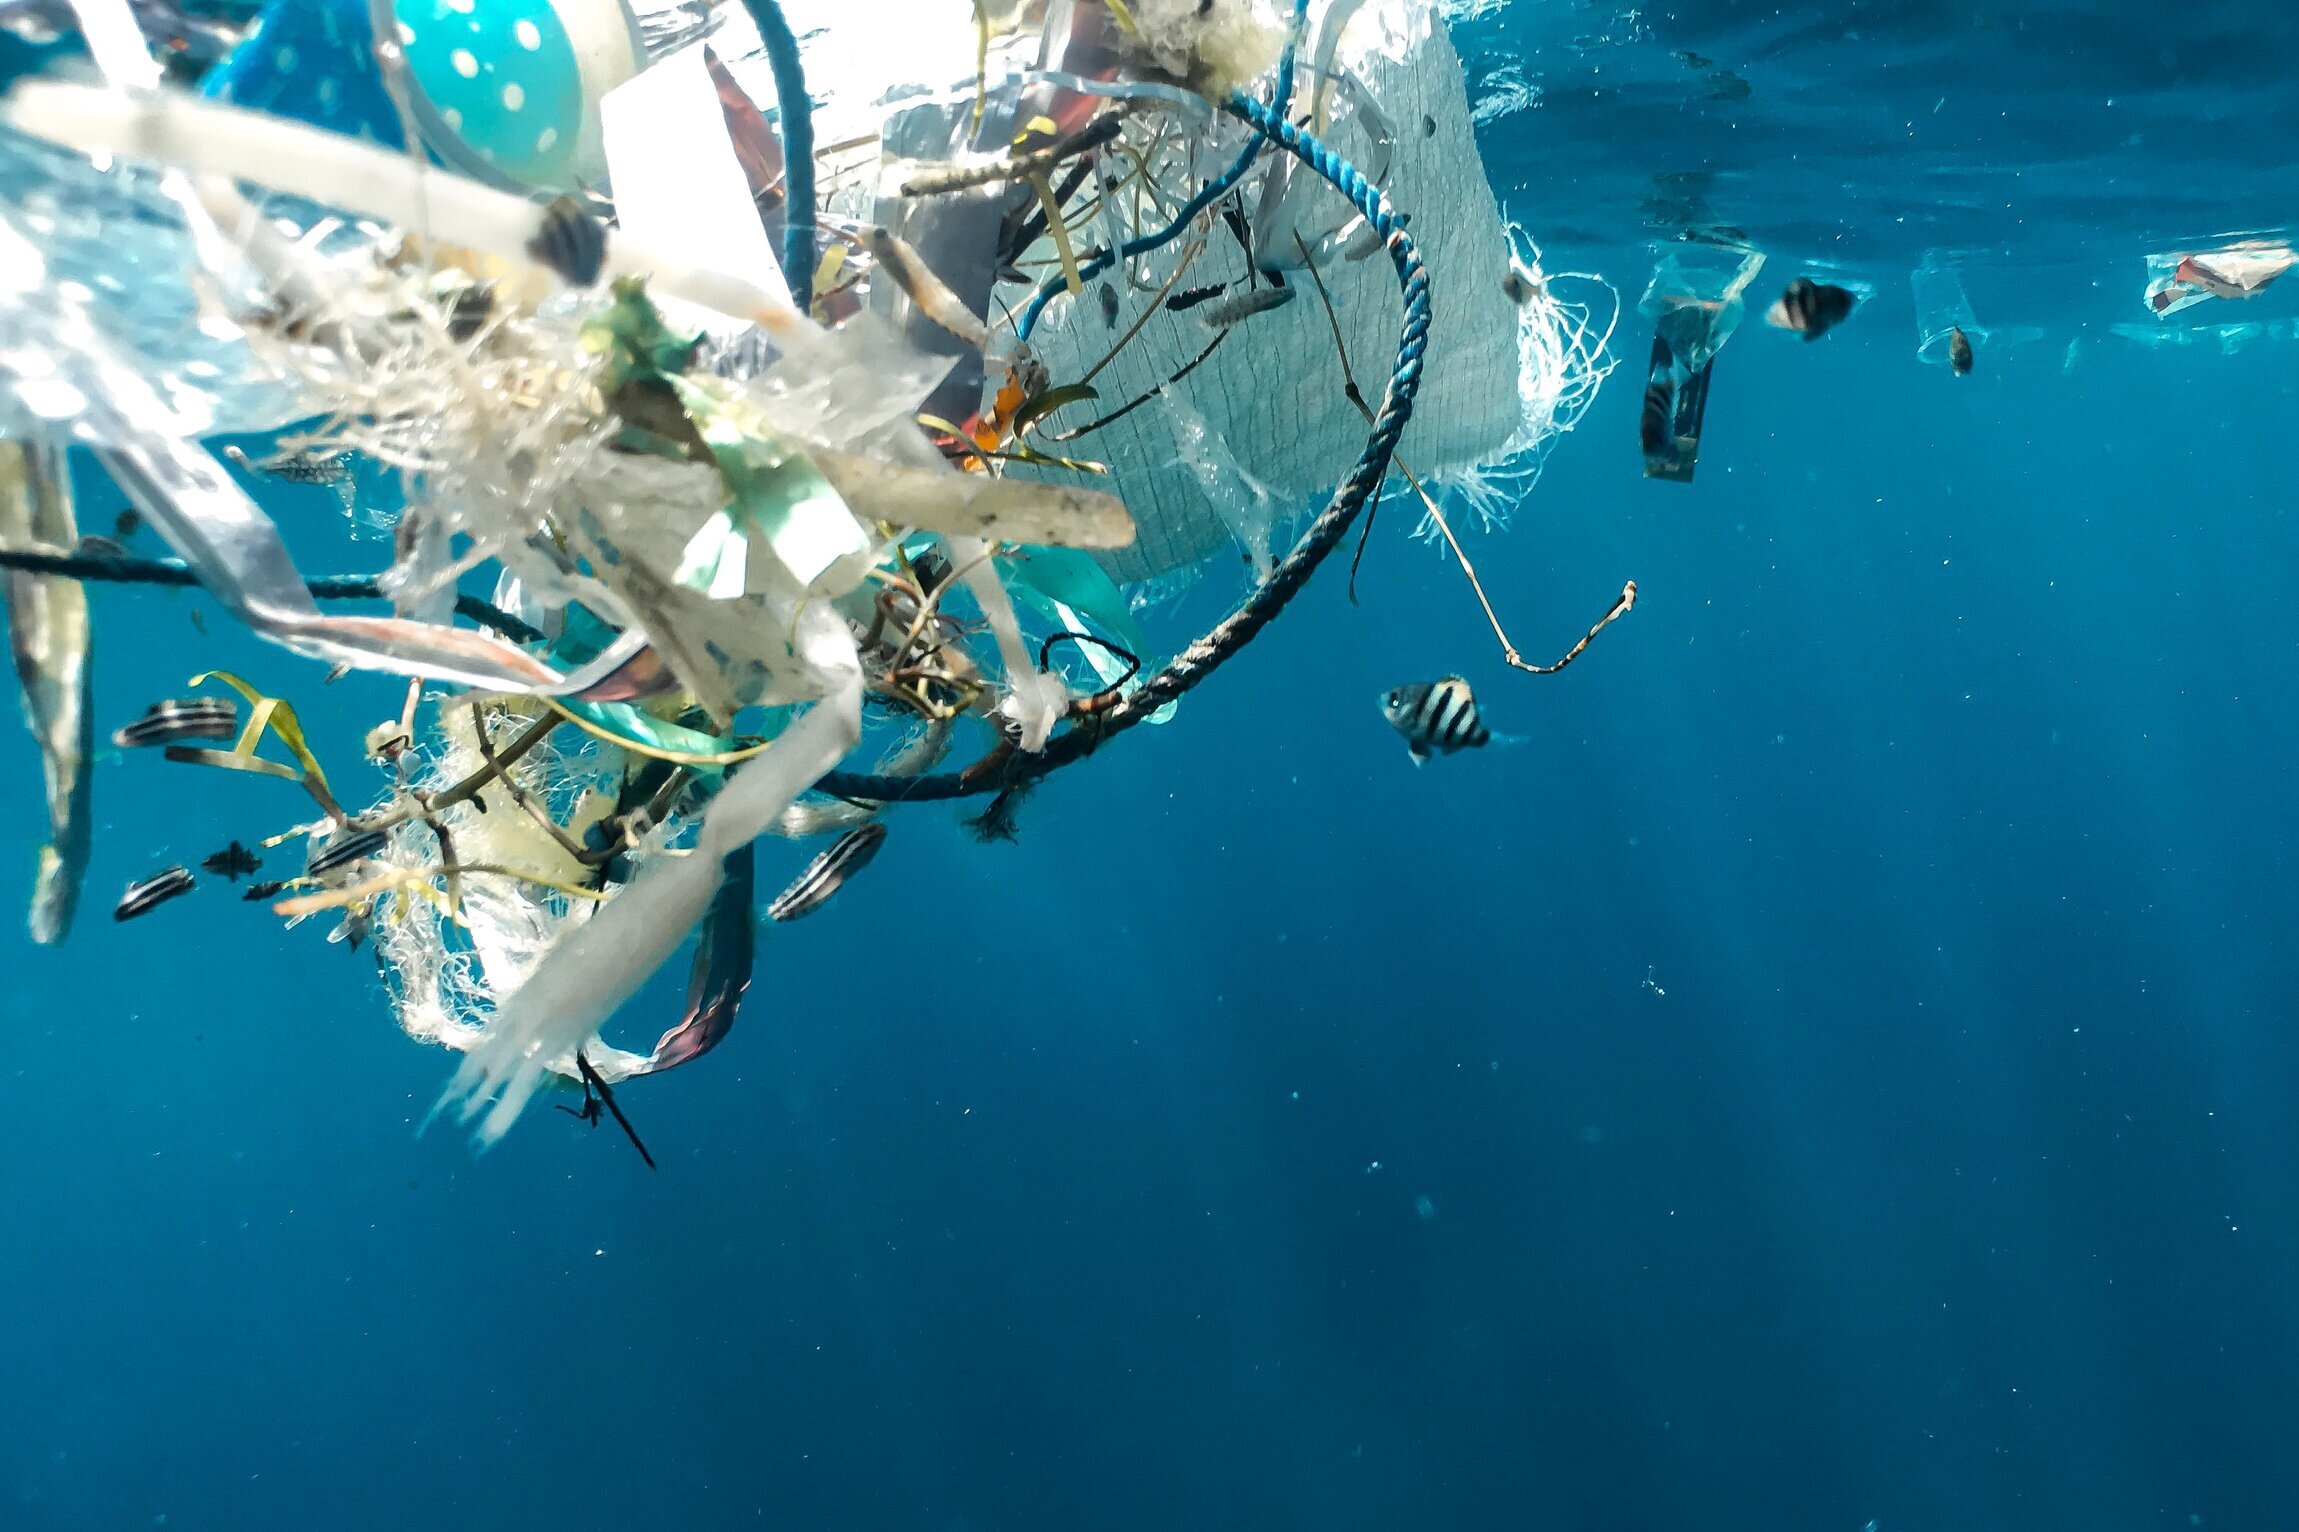 The Impact of Plastic Waste on Marine Life and Ways to Mitigate It